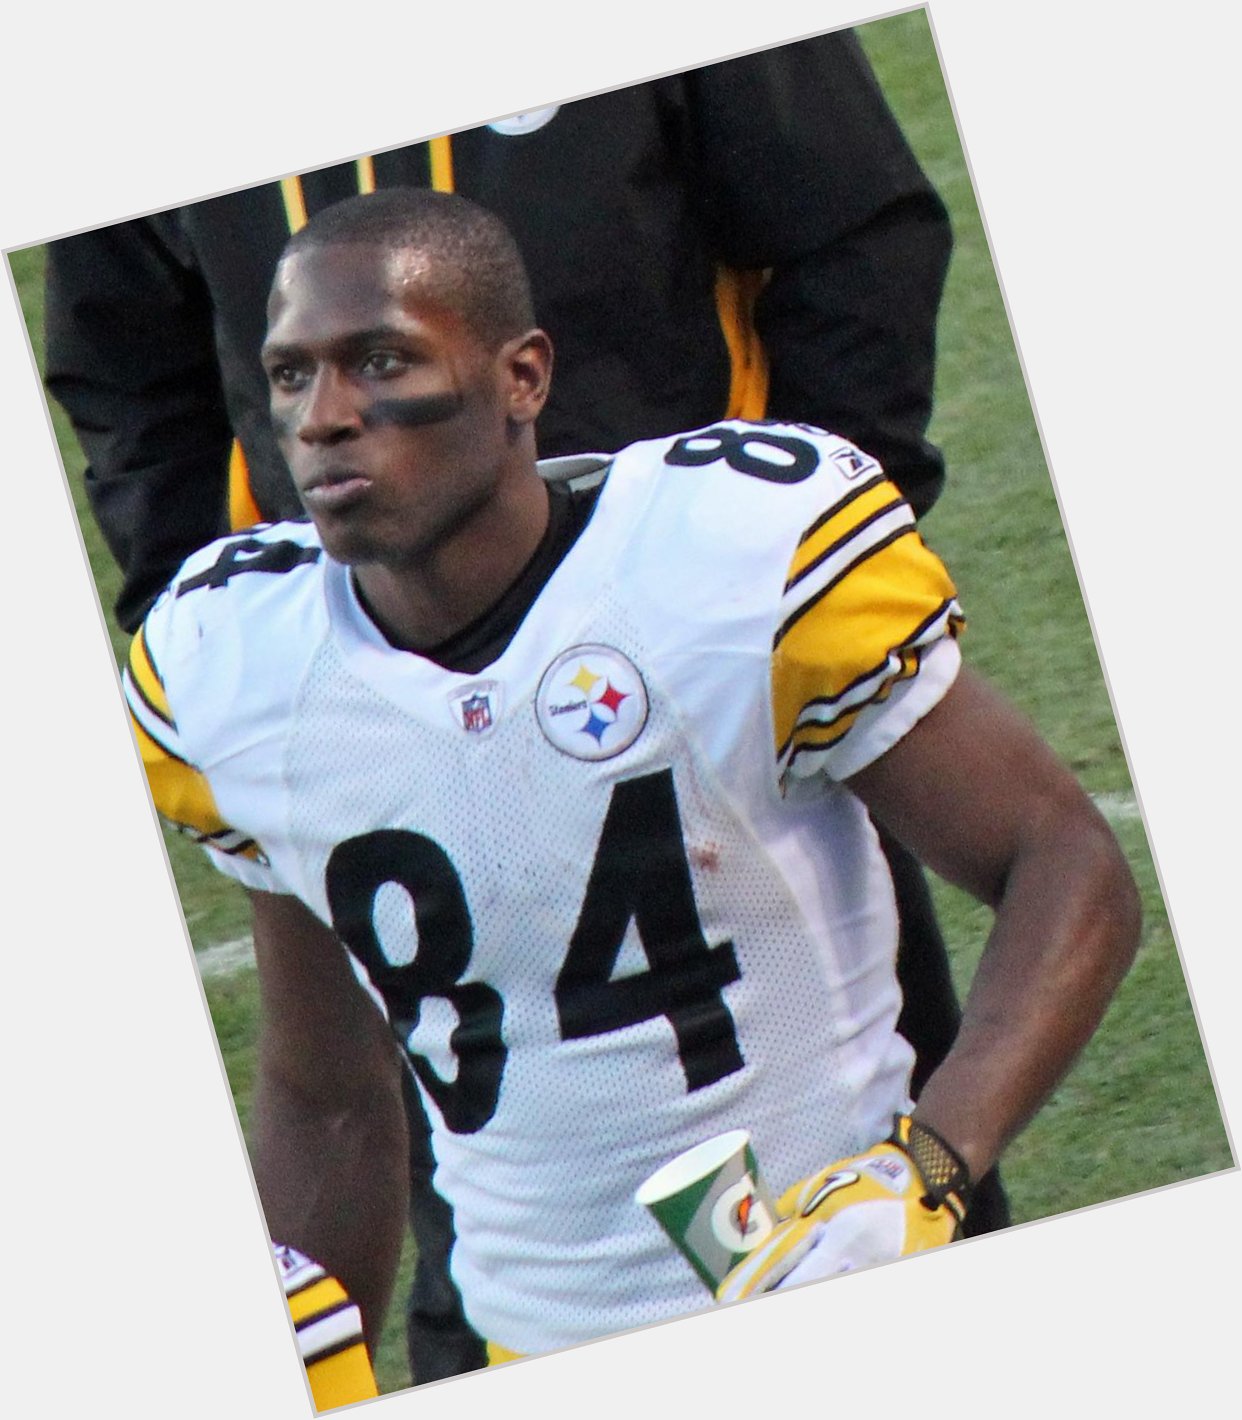 Happy 27th birthday to the one and only Antonio Brown! Congratulations 